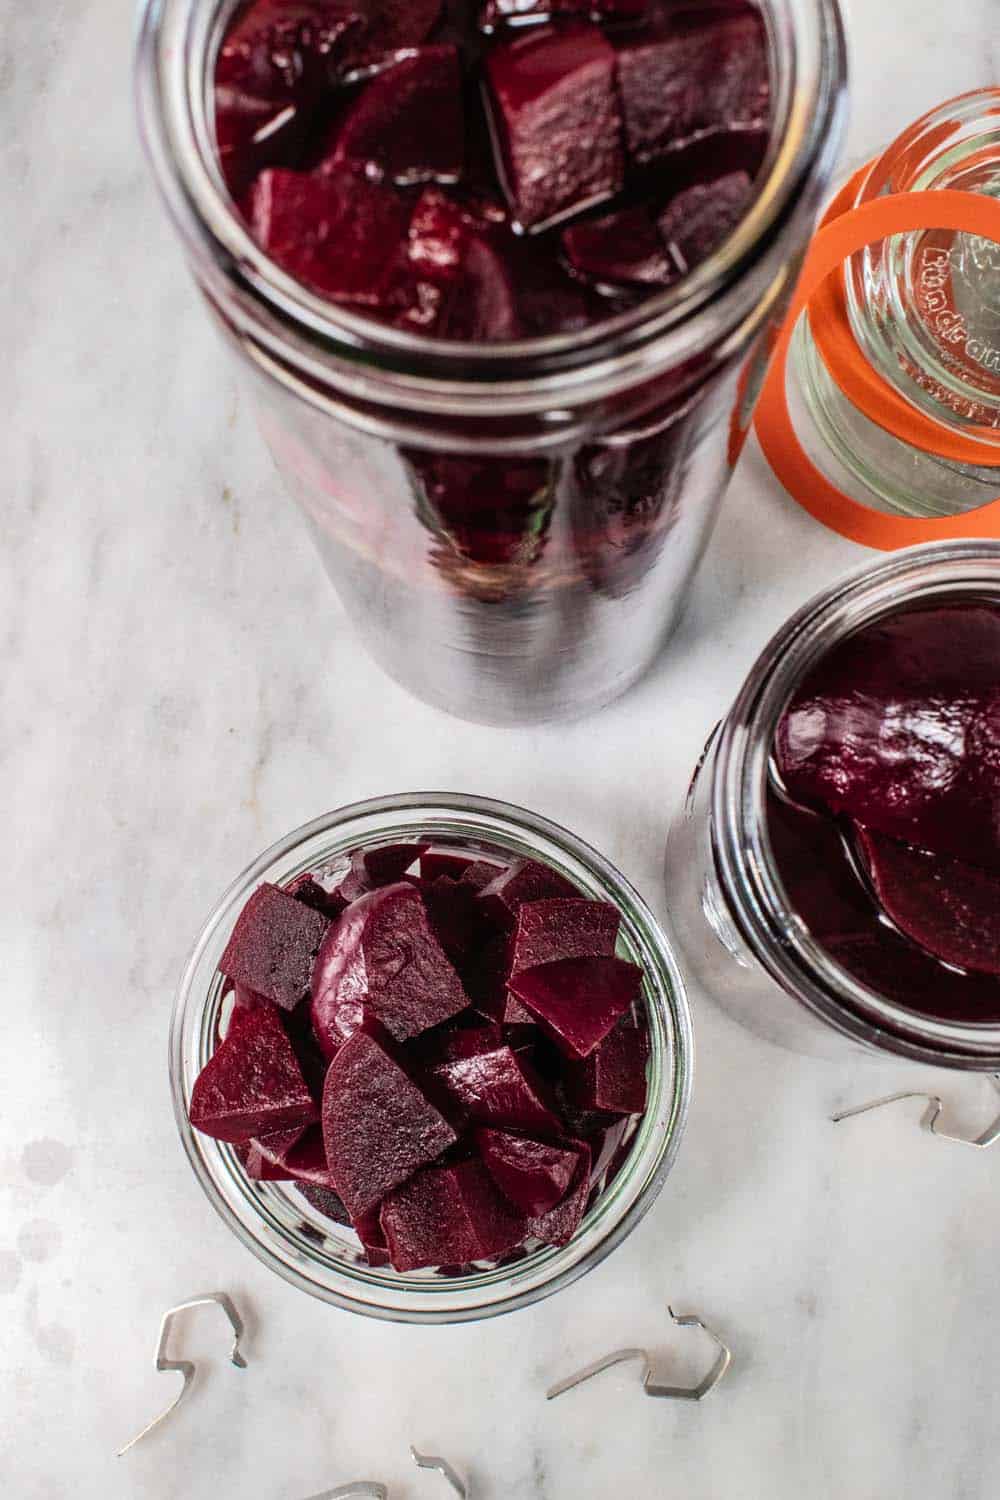 Are Beets Good For You? An Easy Recipe For Pickled Beets